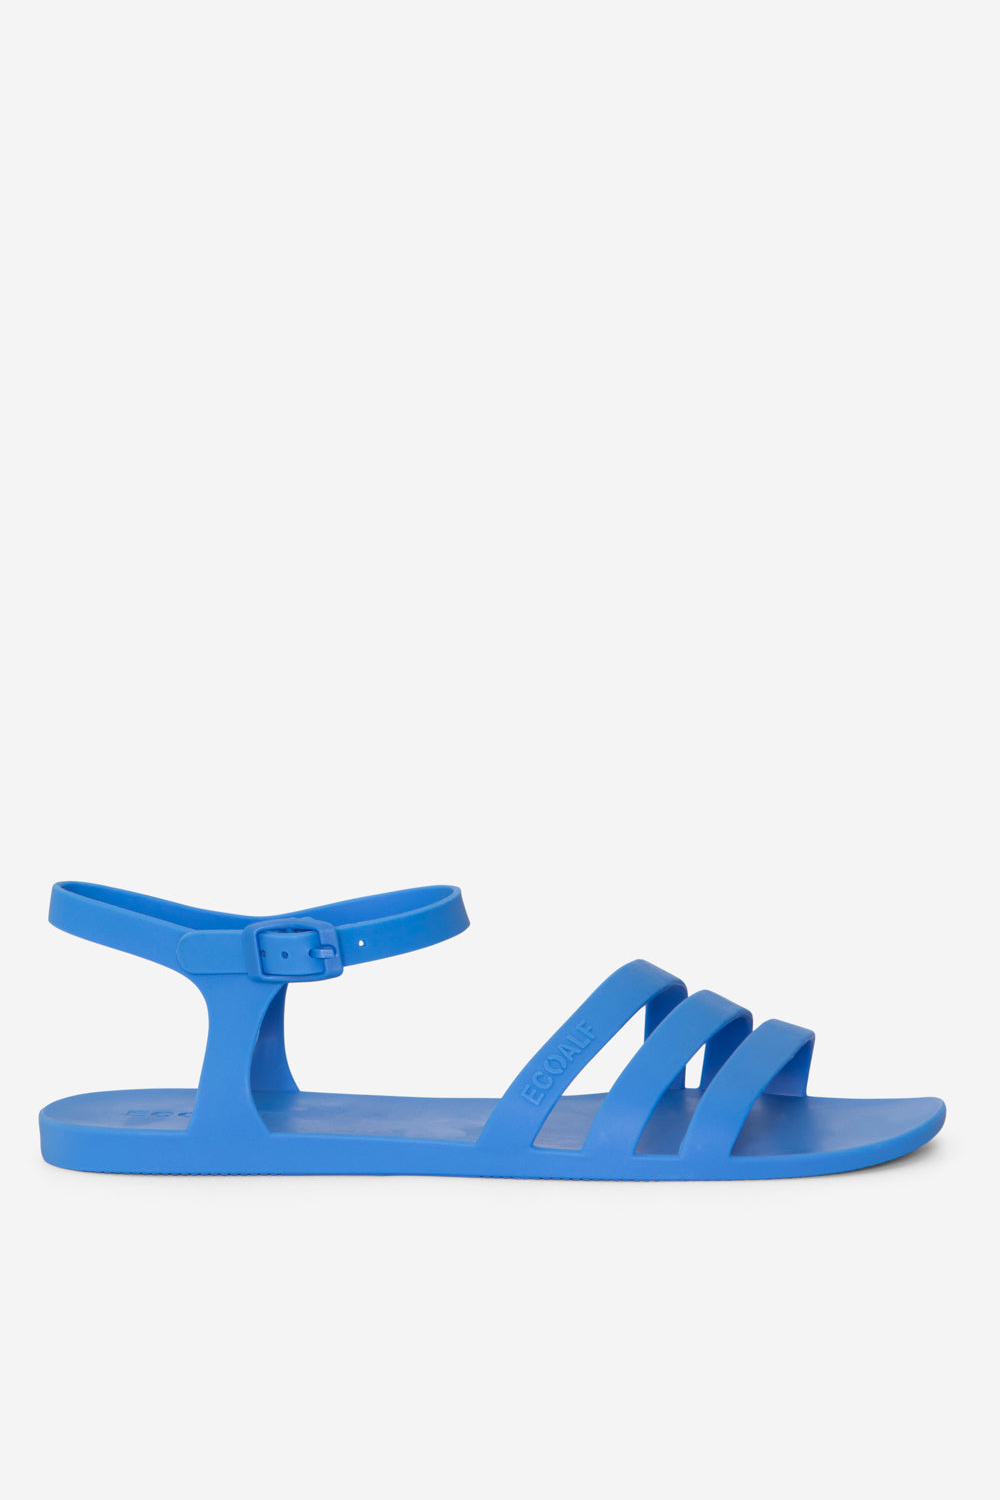 JELLY SANDALS BLUE